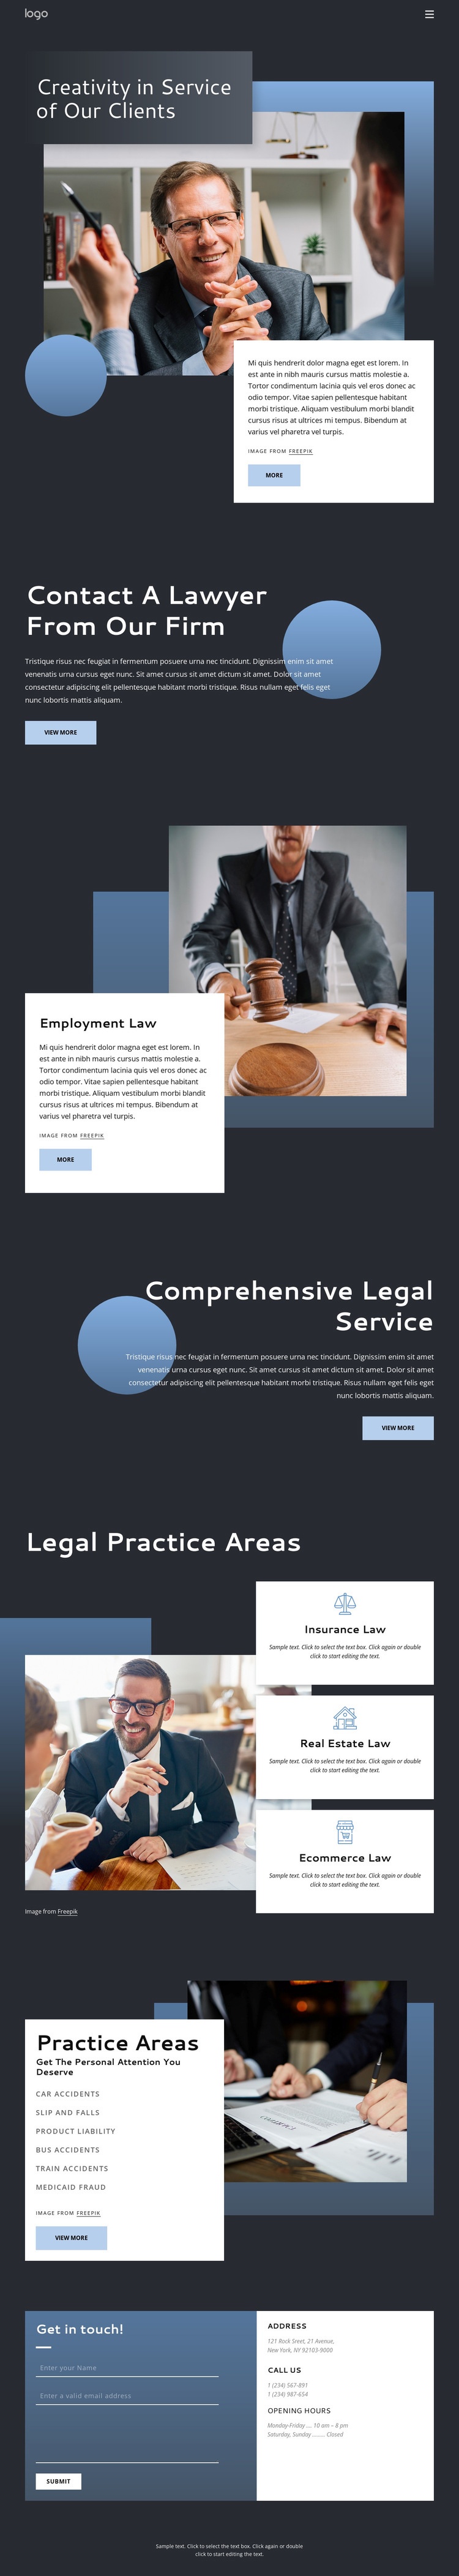 Experienced legal advice Homepage Design